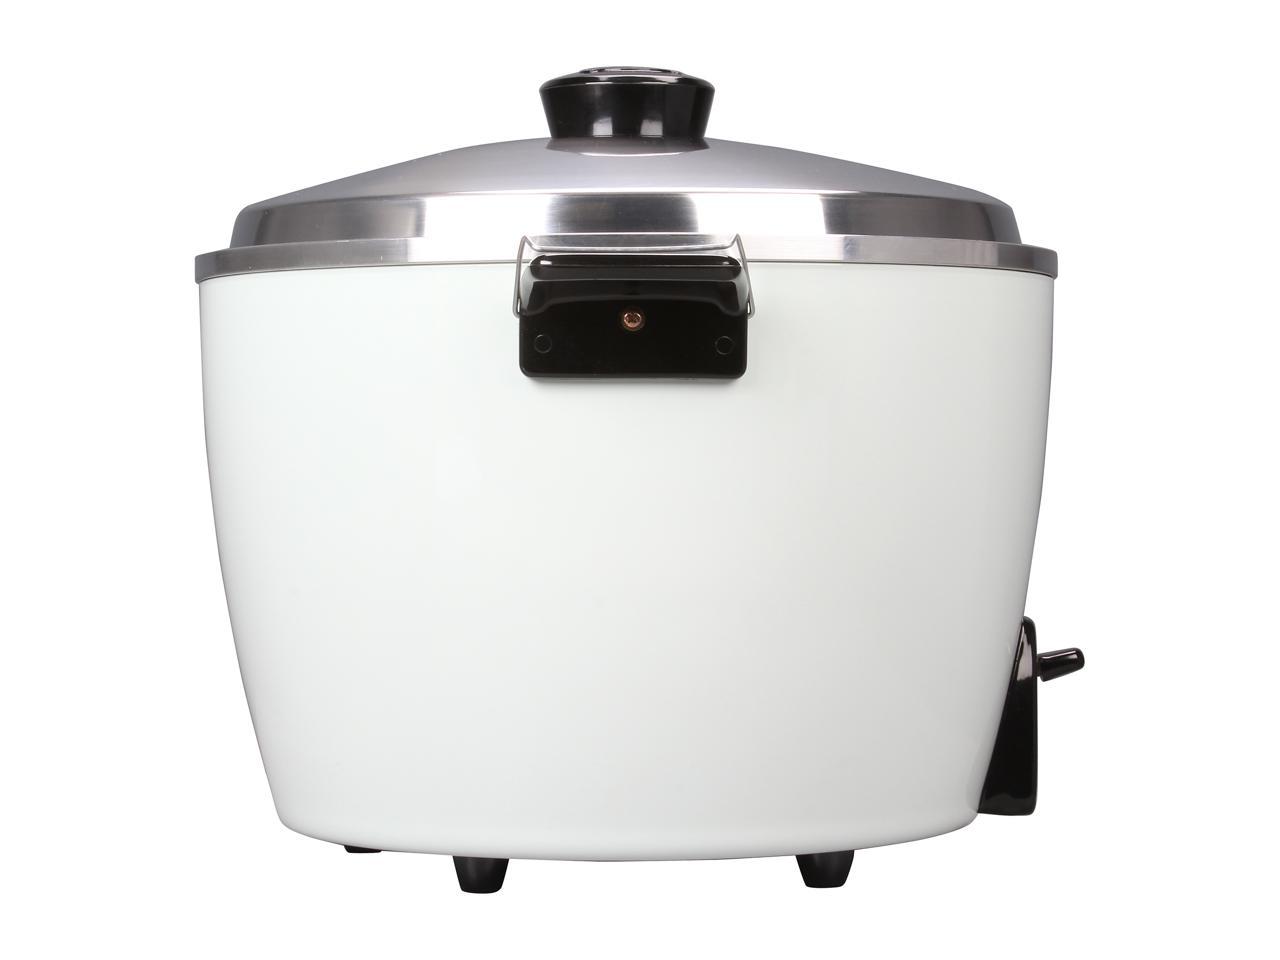 TATUNG TAC-20 White 20 Cup Rice Cooker - Newegg.com 20 Cup Rice Cooker With Stainless Steel Inner Pot